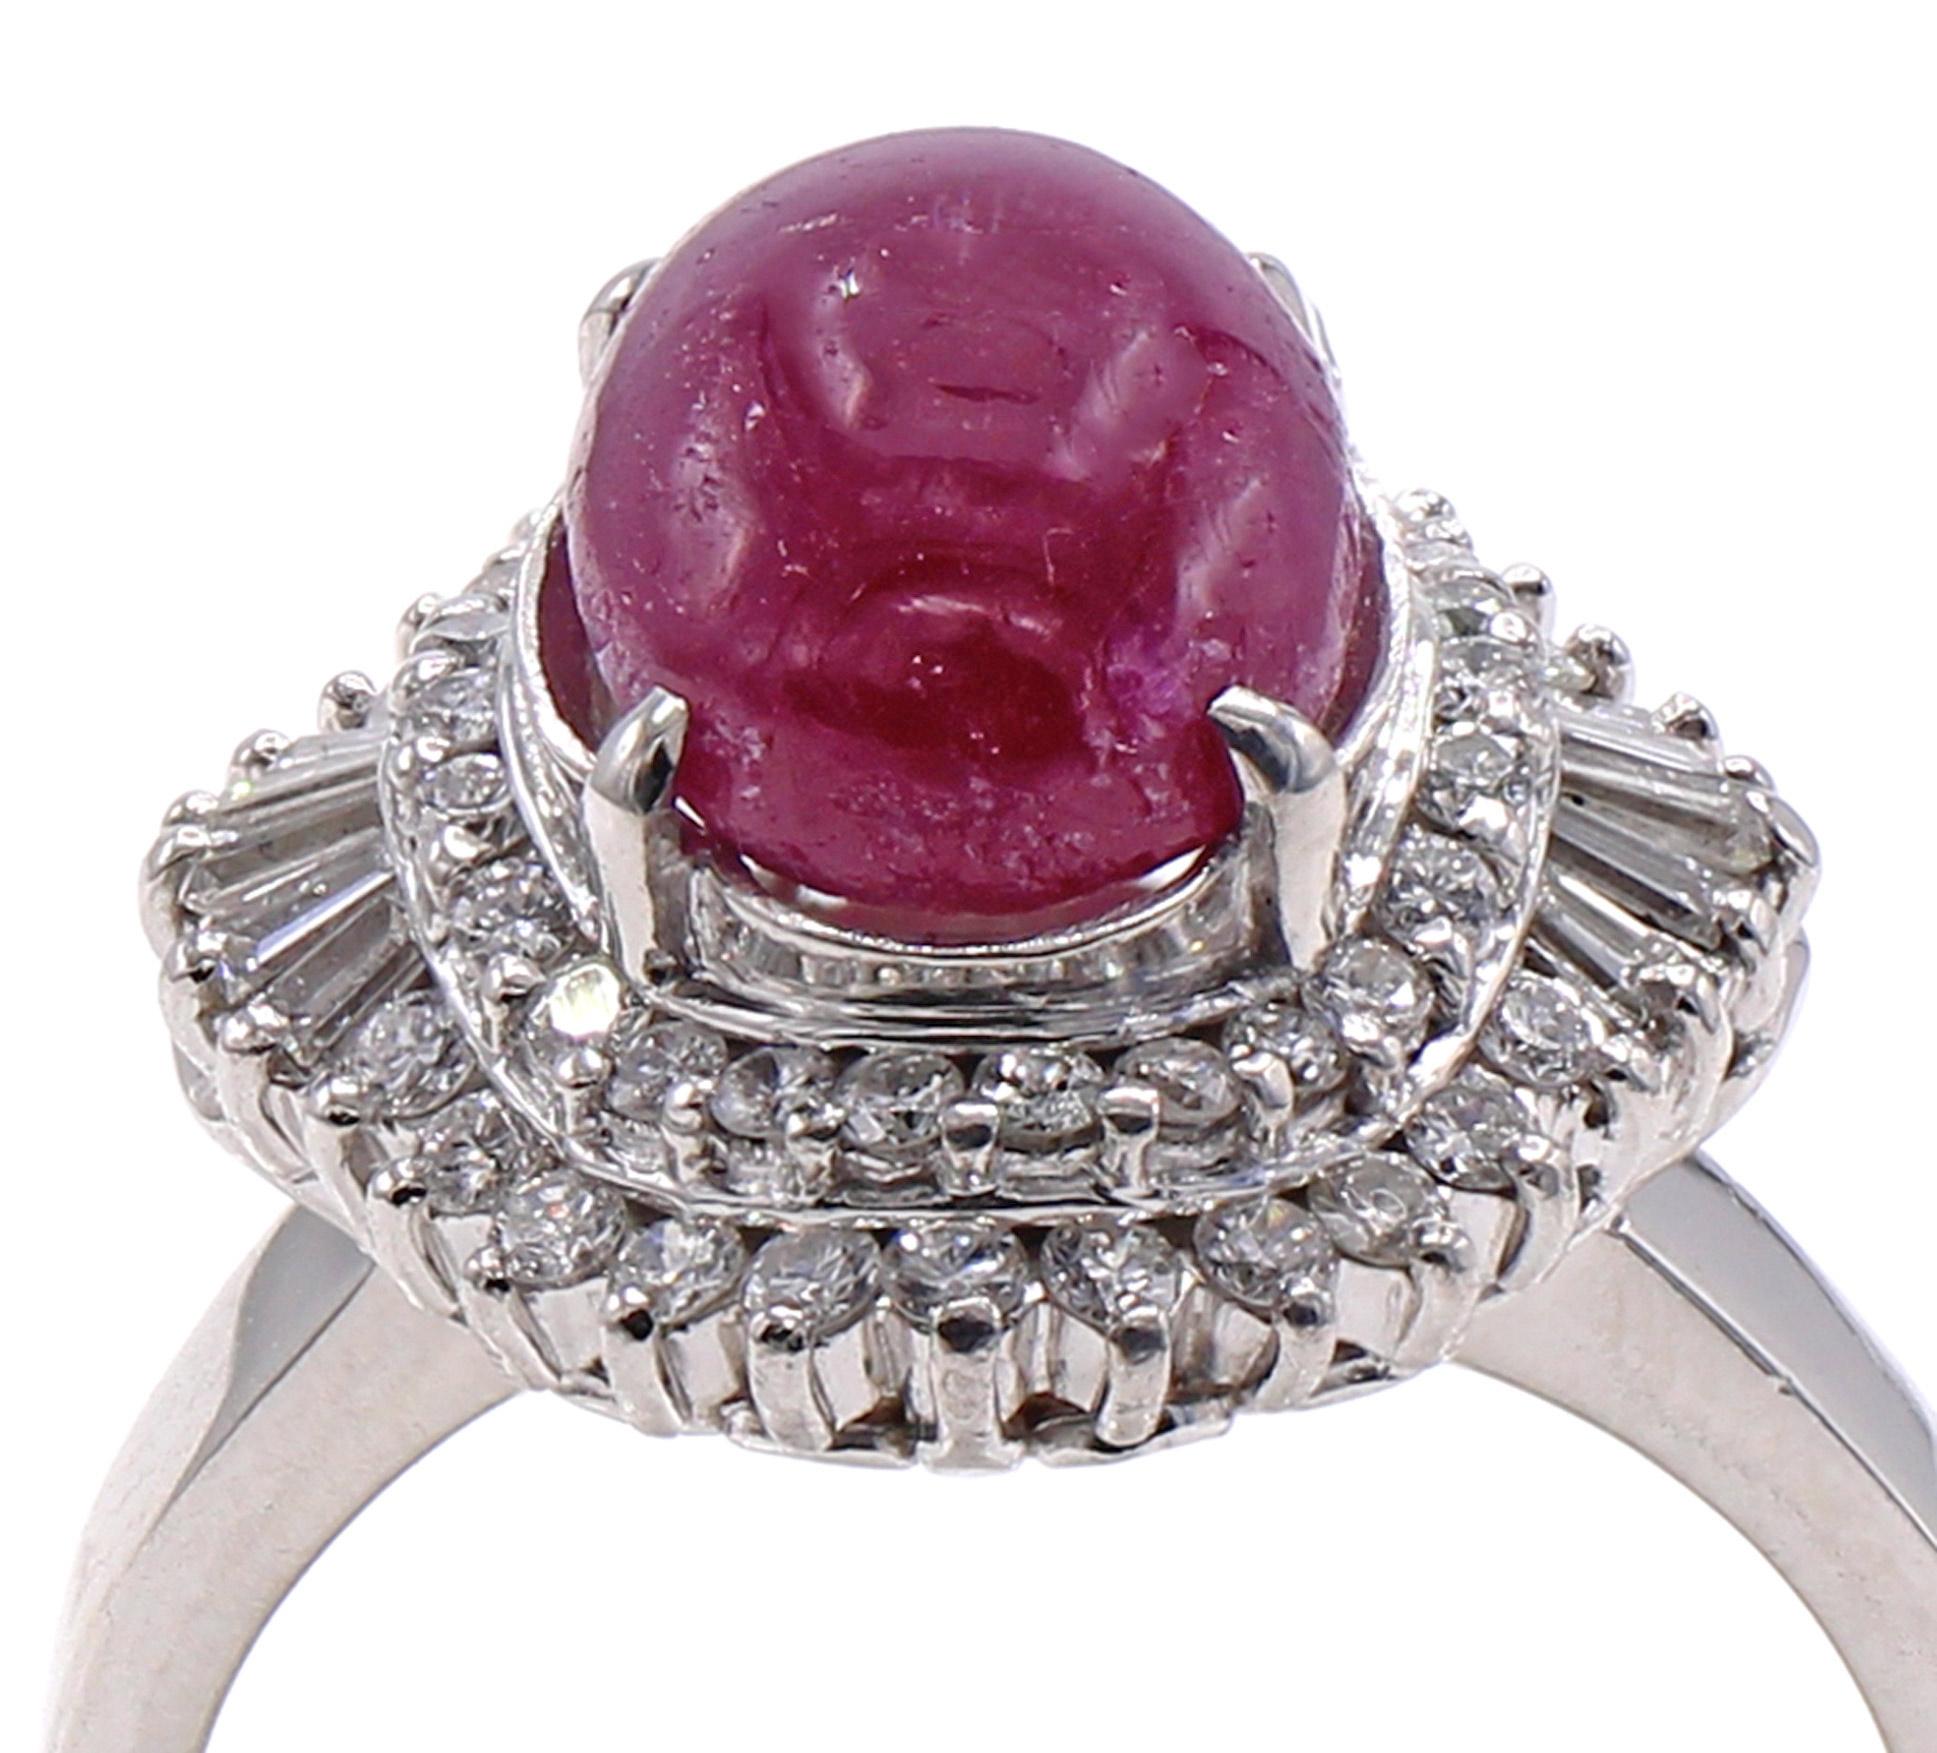 An elongated cabochon ruby weighing approximately 3.80 carats is the center piece of this 1960s ballerina ring. Mounted in platinum with the gallery embellished by bright white and sparkly round brilliant cut and baguette cut diamonds the ring